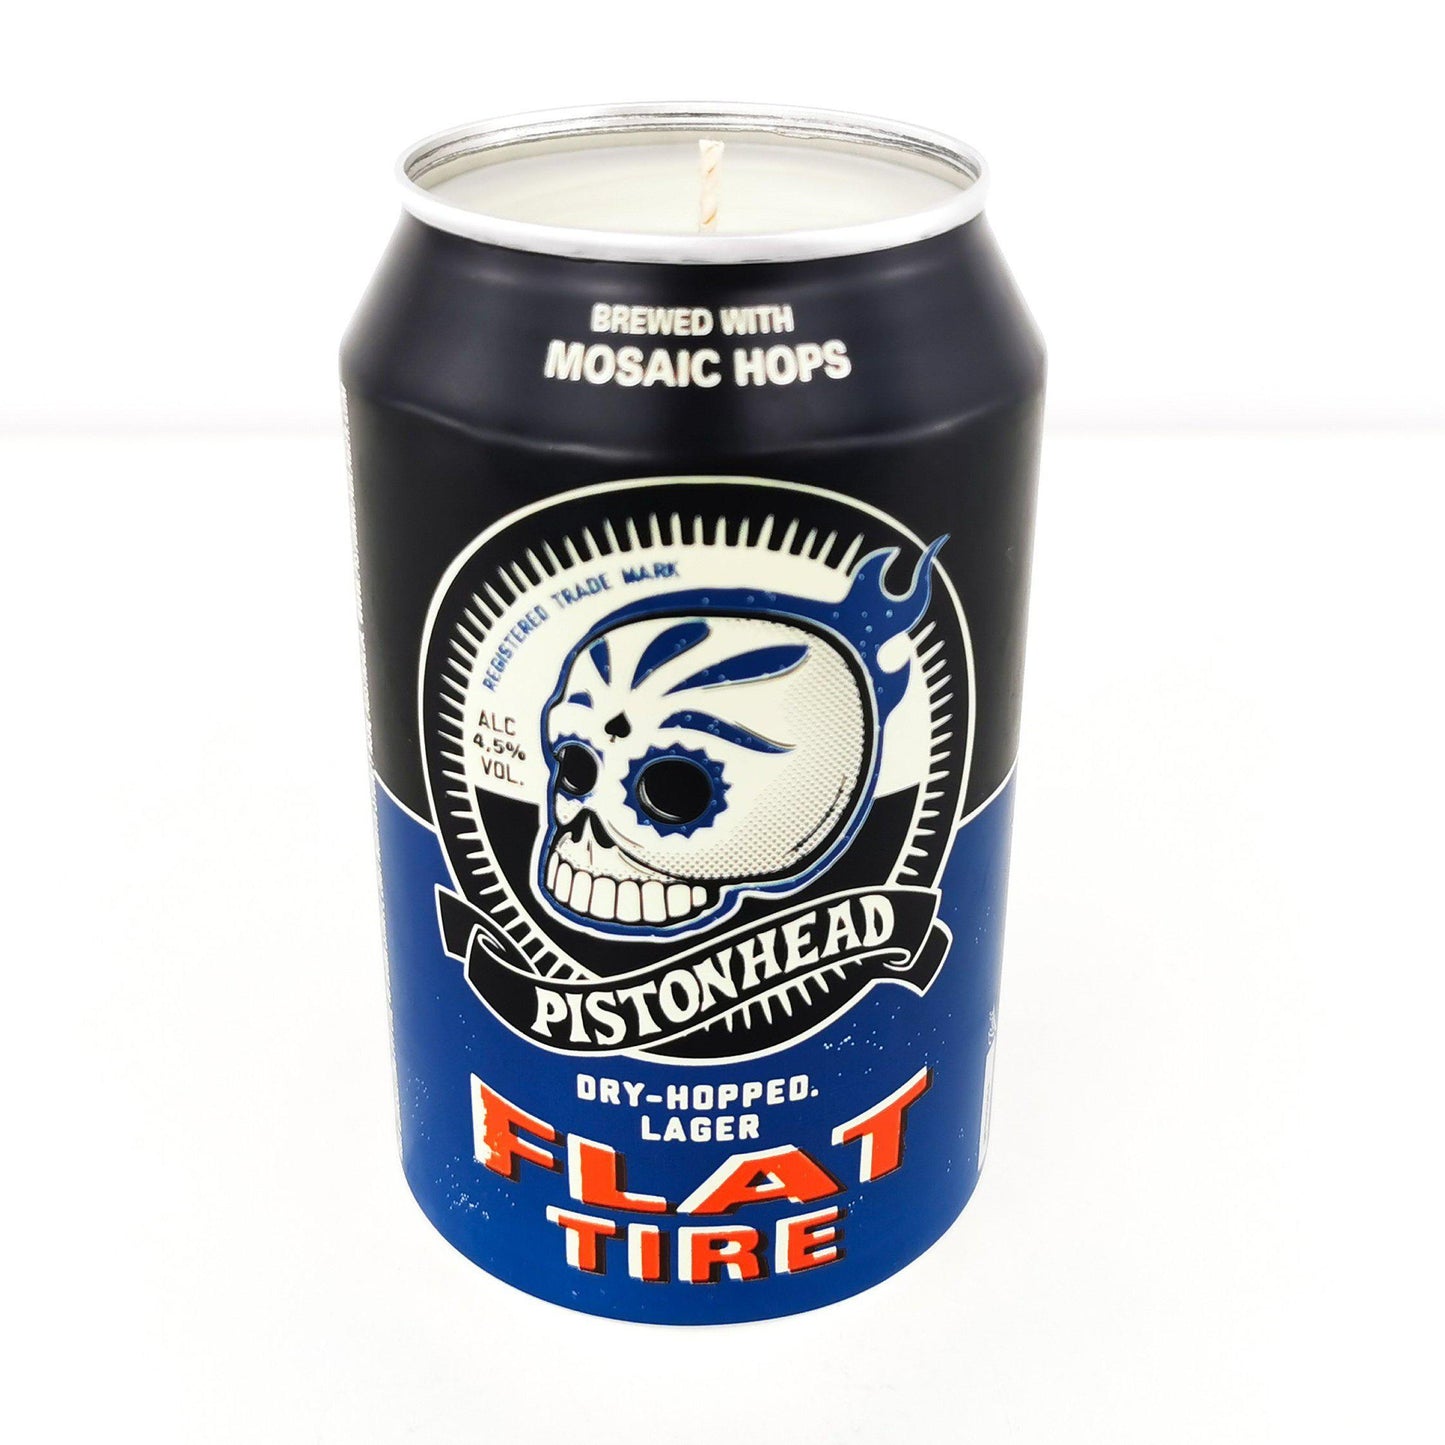 Pistonhead Flat Tire Craft Beer Can Candle Beer Can Candles Adhock Homeware